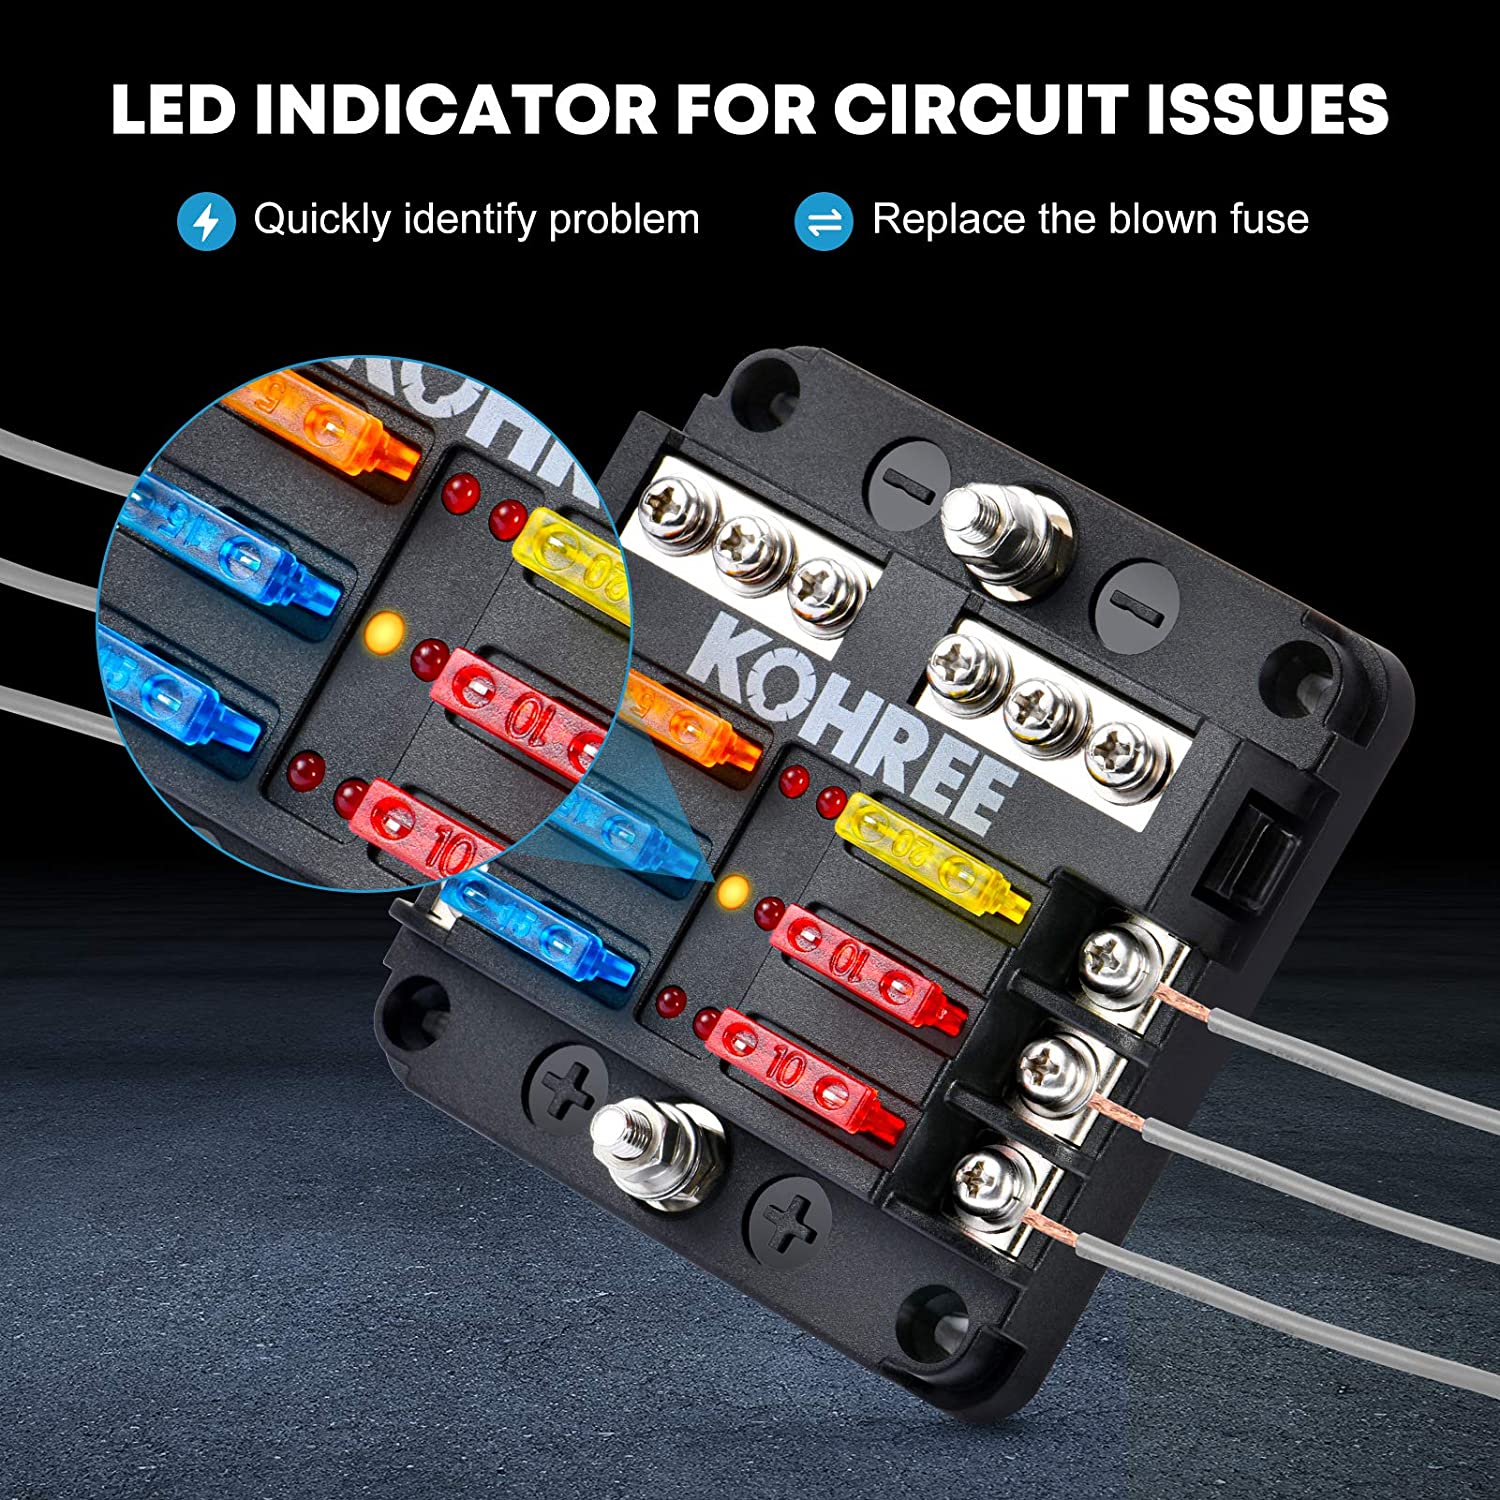 LED Indicator for Circuit Issues